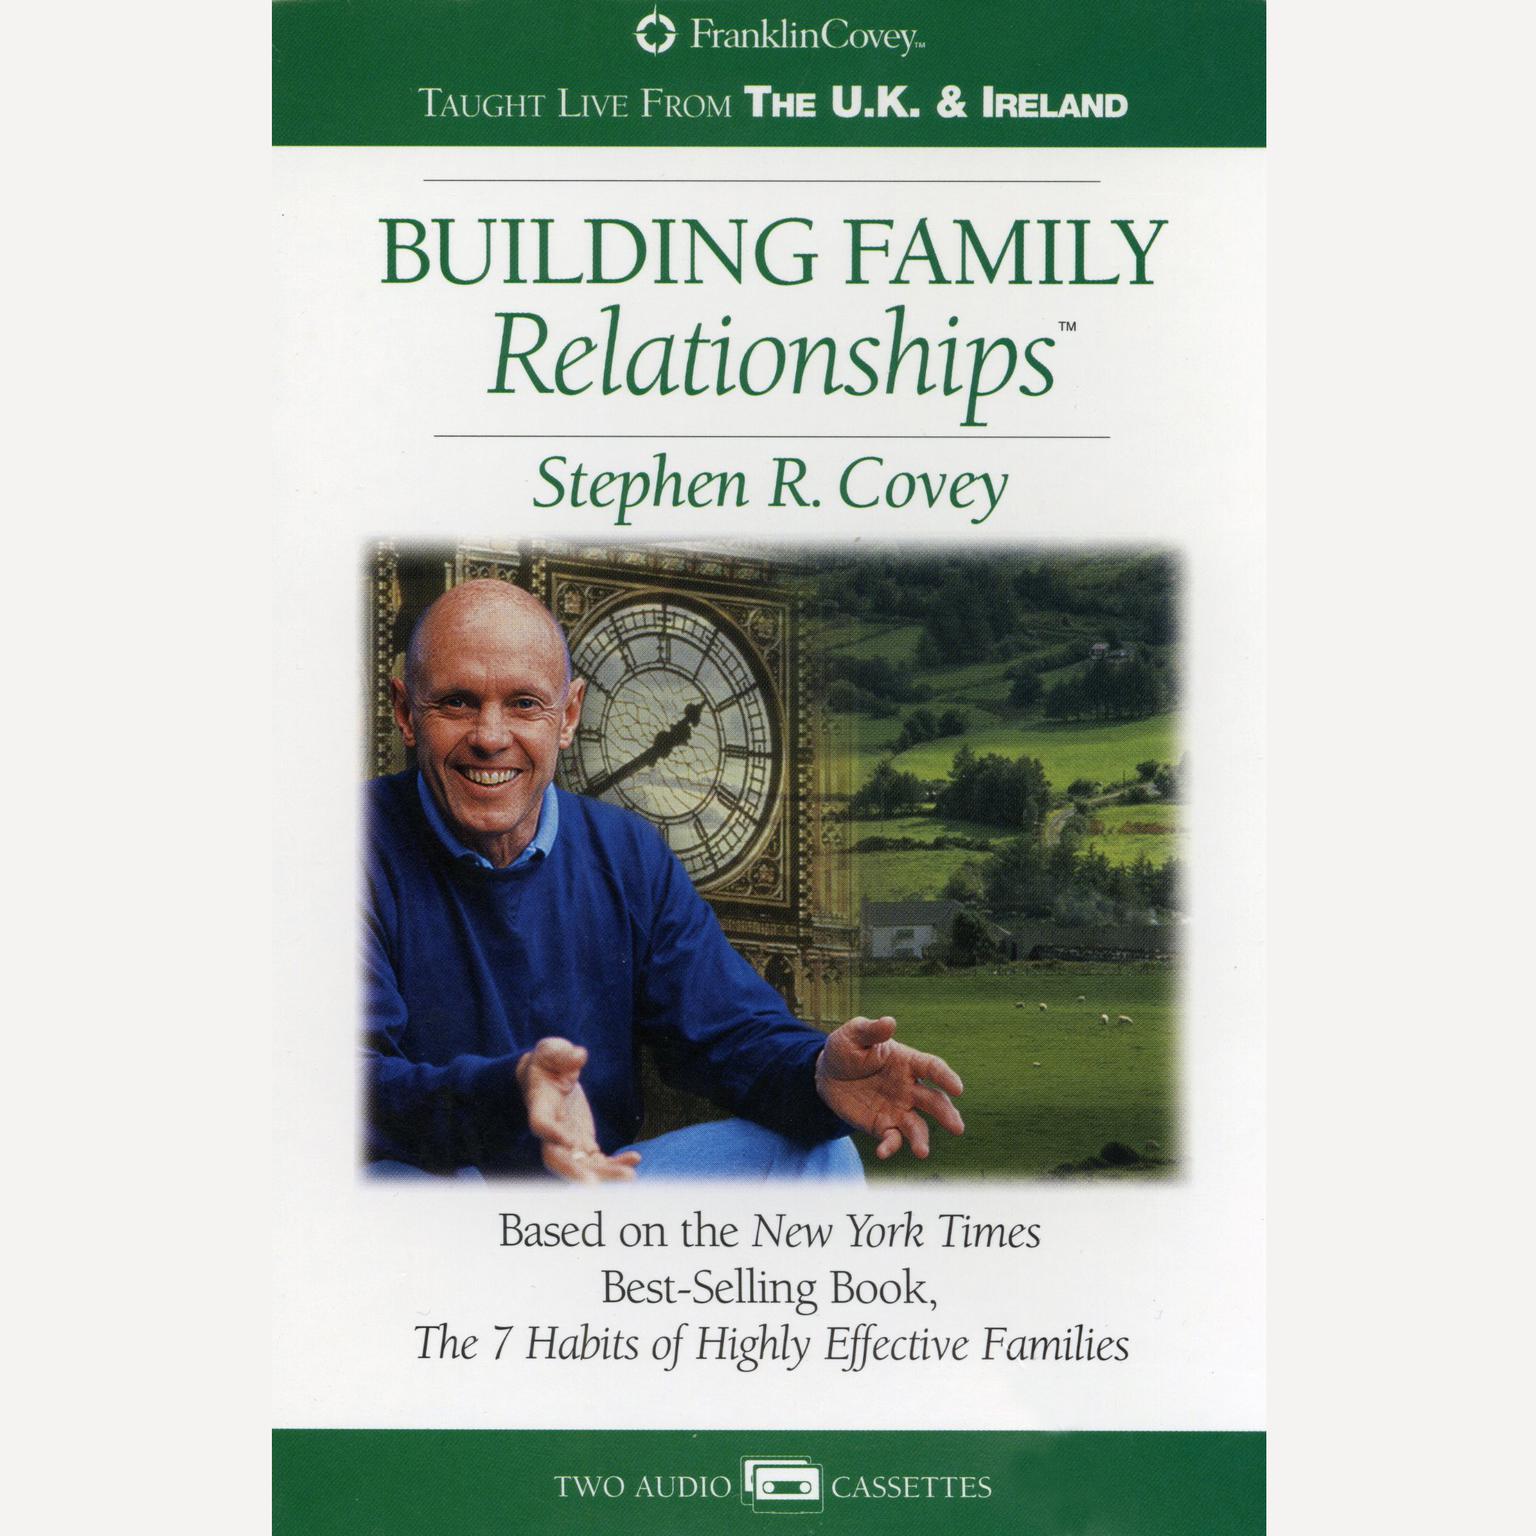 Building Family Relationships (Abridged) Audiobook, by Stephen R. Covey